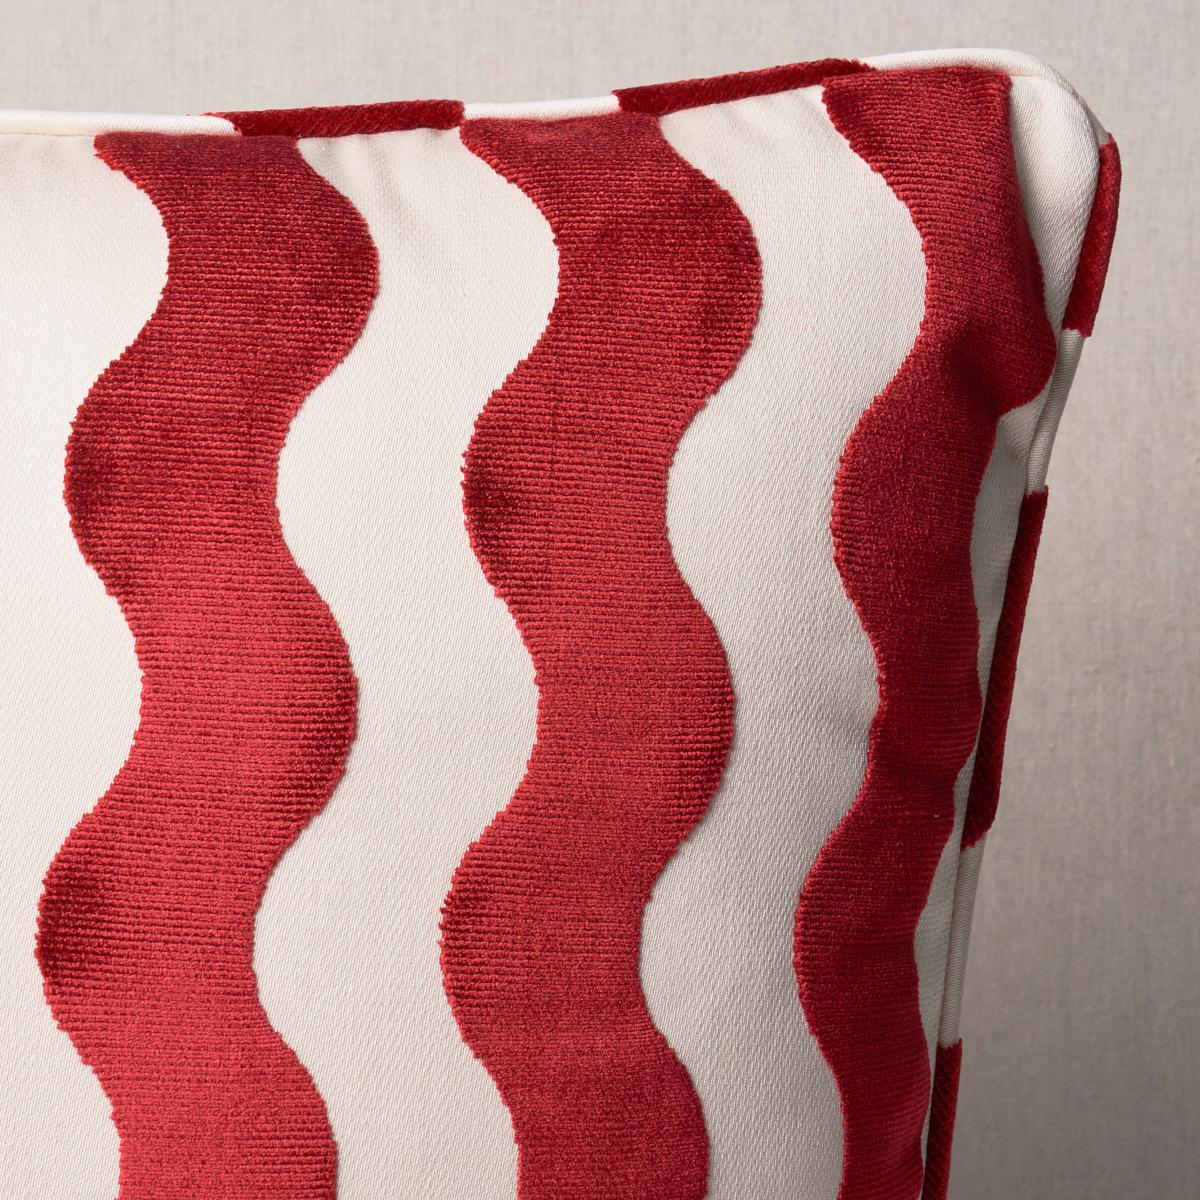 This pillow features The Wave Velvet by Miles Redd for Schumacher with a self welt finish. Pierre Cardin and Yves Saint Laurent designs from the 1970s inspired The Wave in red, a chic and graphic cut velvet fabric created by Miles Redd. Pillow